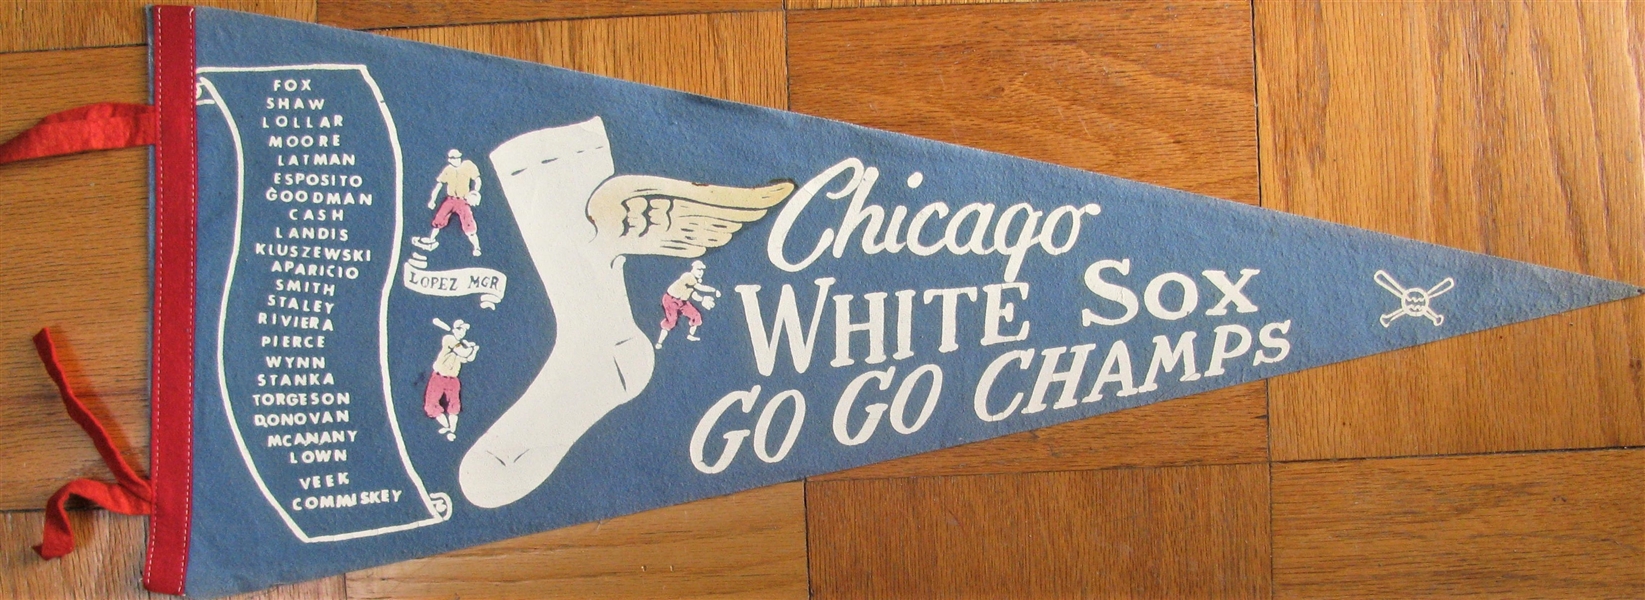 1959 CHICAGO WHITE SOX GO GO CHAMPS SCROLL PENNANT